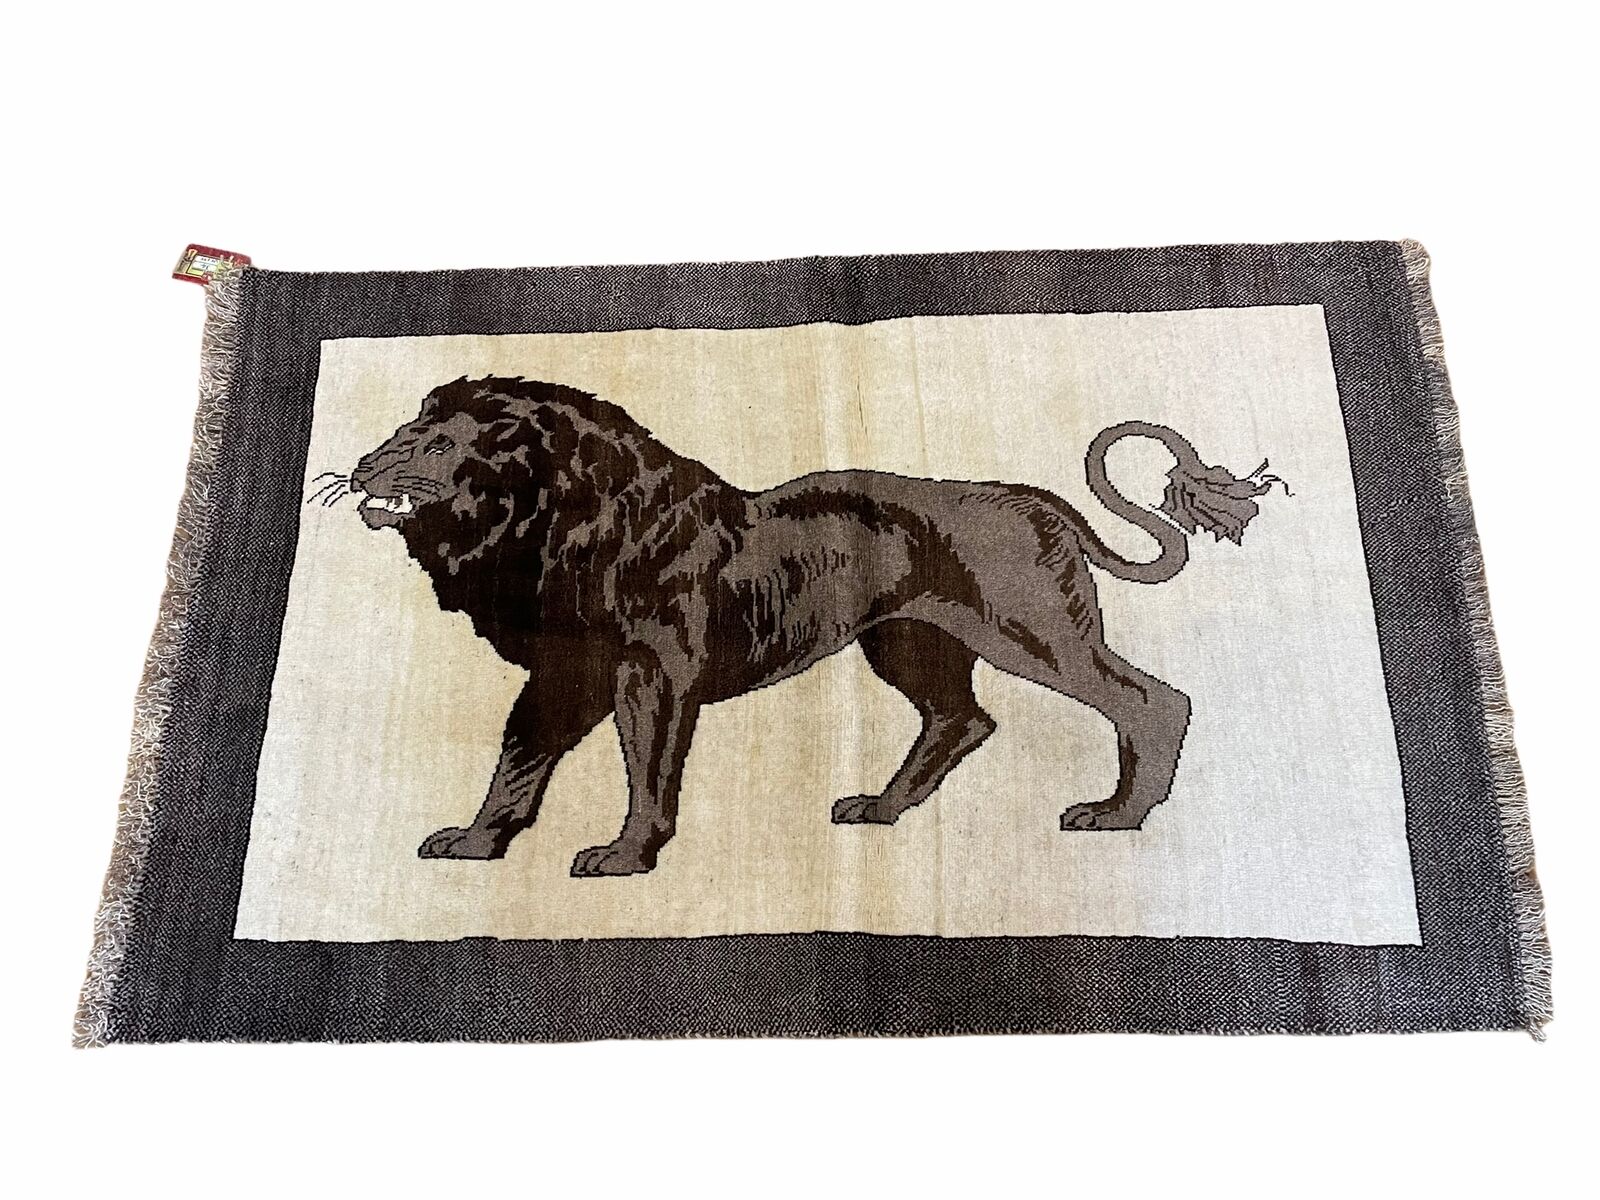 3 x 5 Handmade Rug Brown Beige Hand-Knotted Lion Rug New Vintage Quality Animal